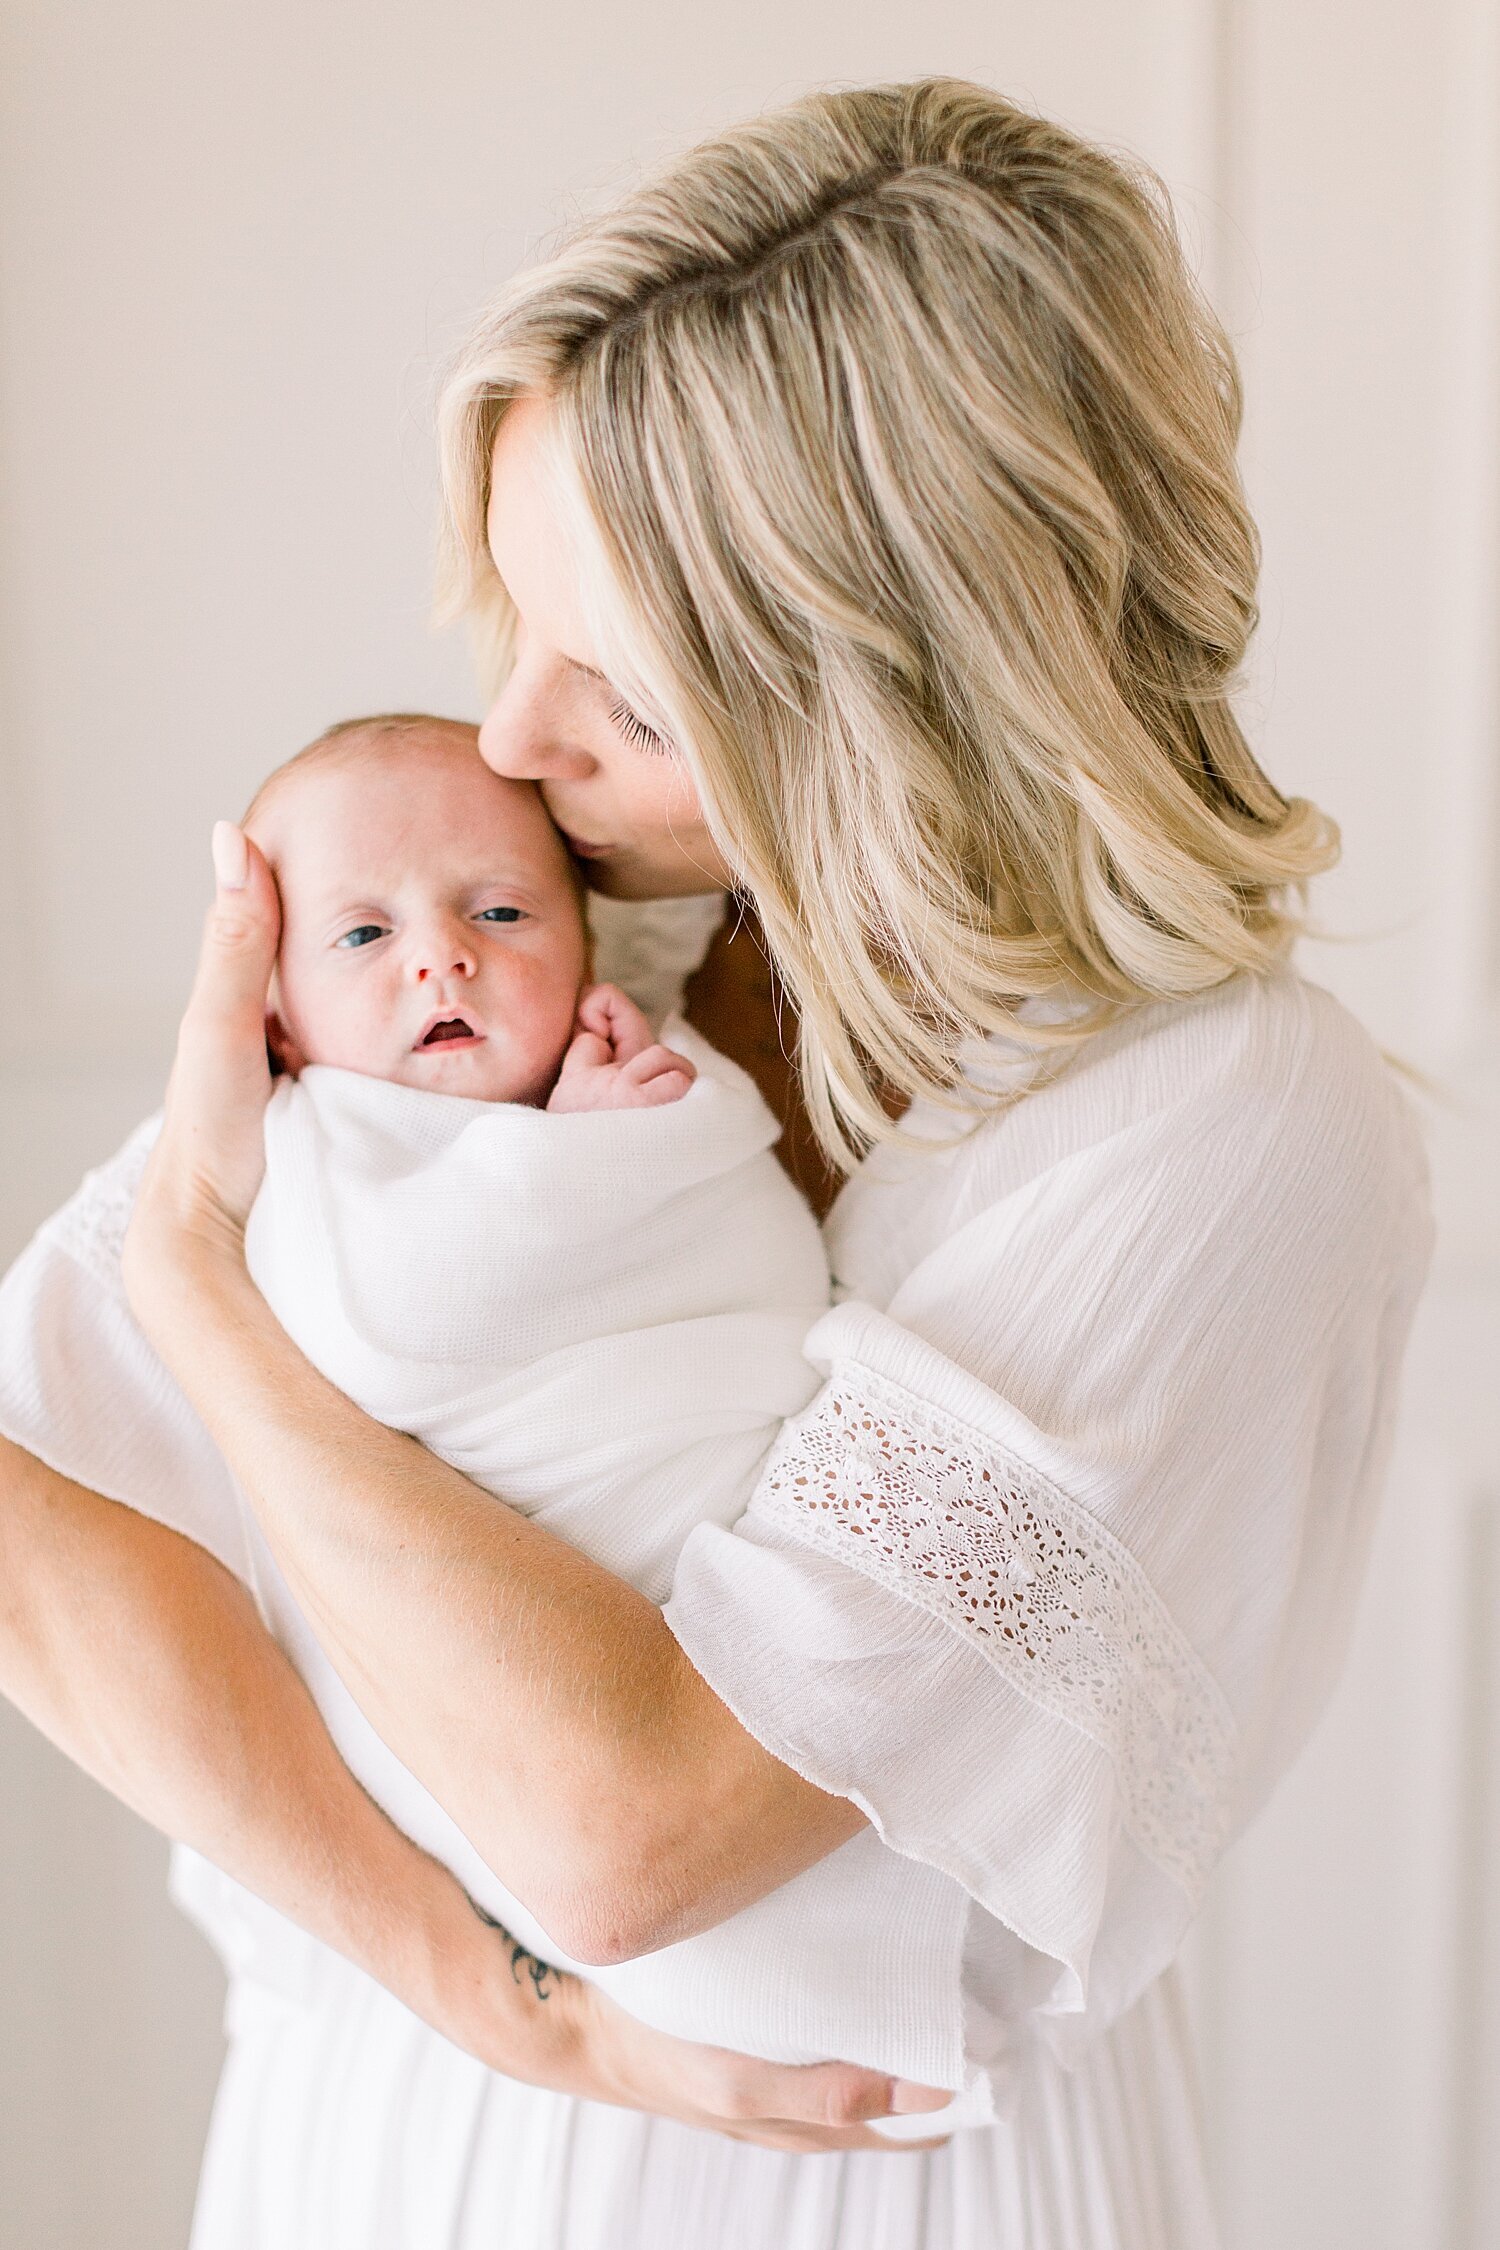 Mom and newborn baby boy | Photos by Ambre Williams Photography